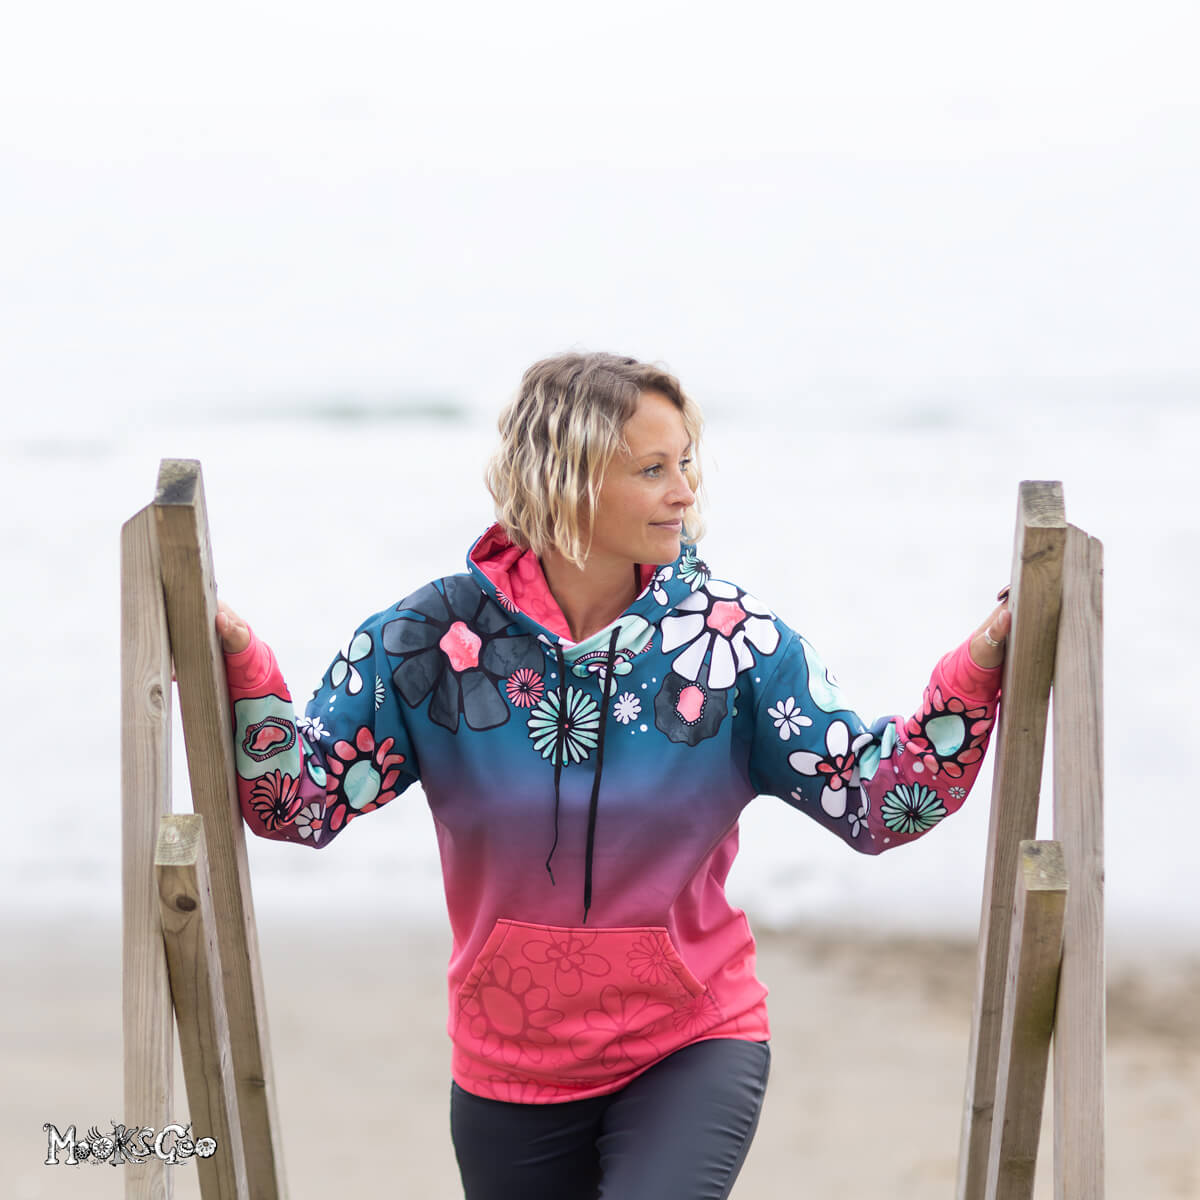 Michelle Lott (MooksGoo) modelling the Size Small Colour Fade Flower Power Recycled Unisex Hoodie, with watercolour illustrated flowers and bold teal with coral pink. Photography by Julian Winslow along Shanklin Esplanade on the Isle of Wight